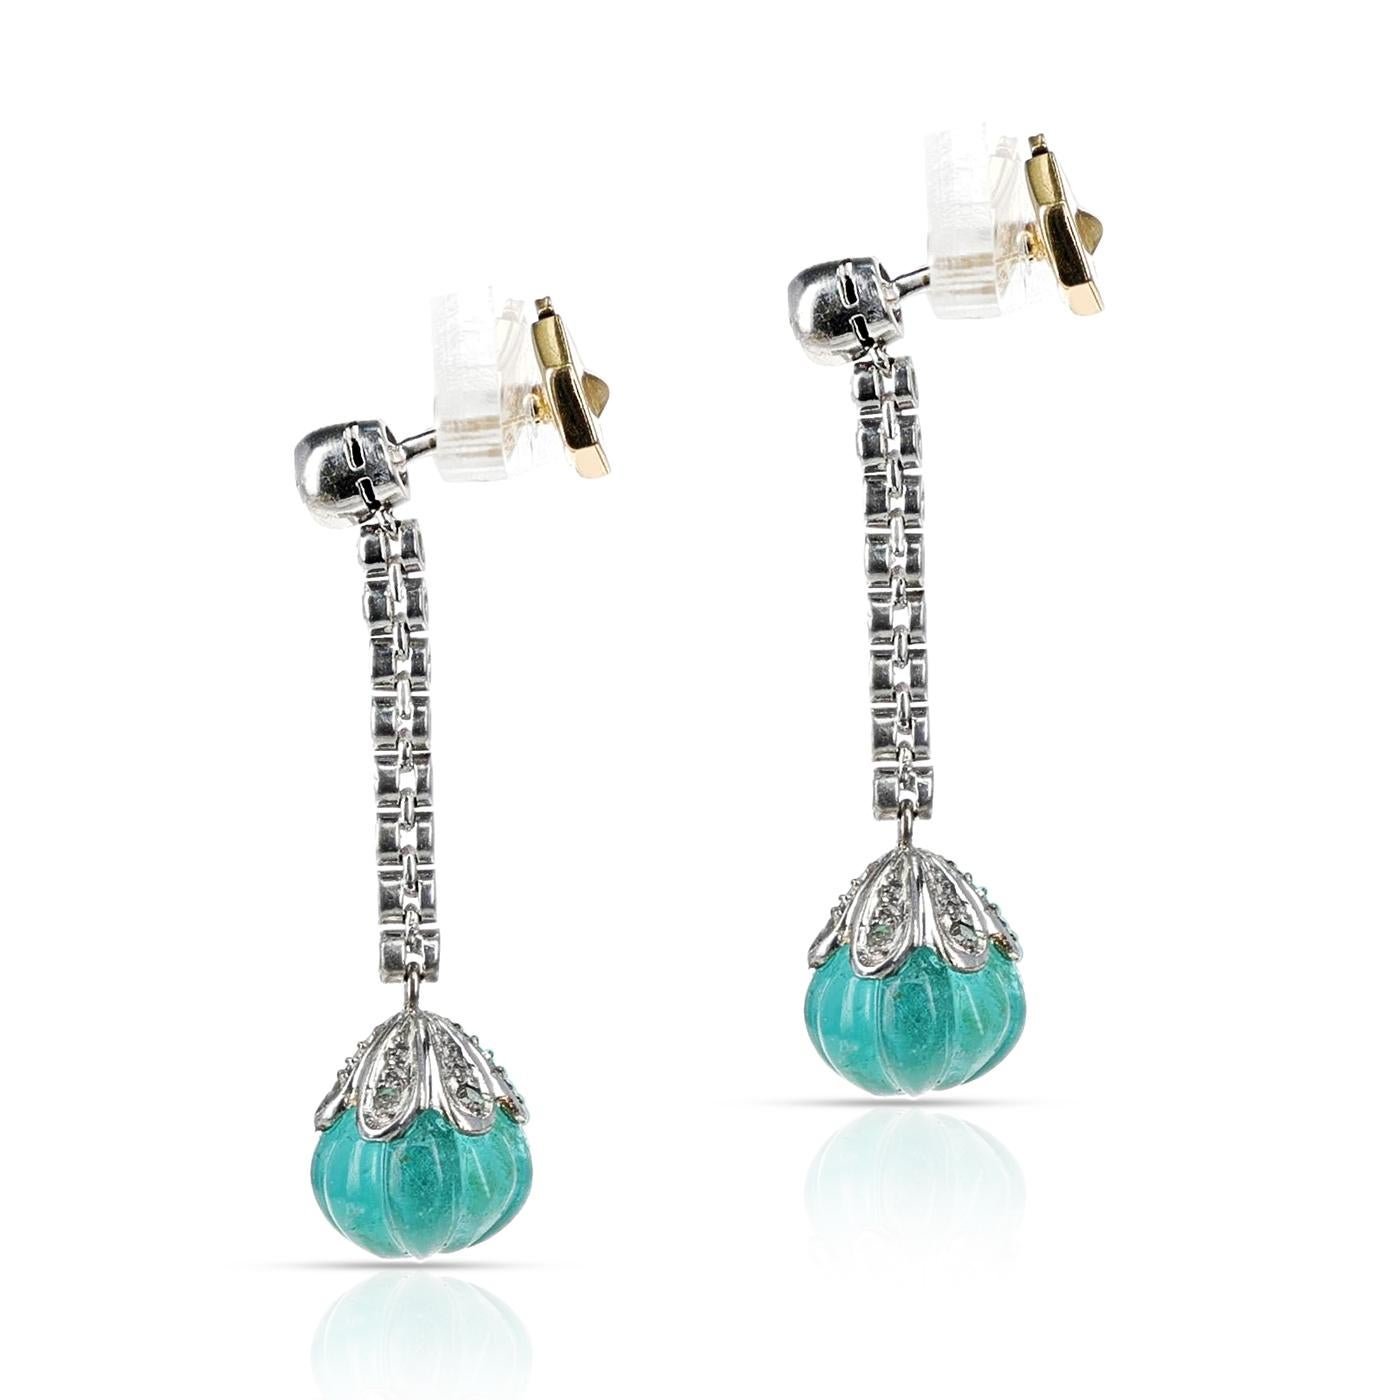 A pair of Round Diamond and Emerald Carving Dangling Earrings made in 18 Karat White Gold. The length is 1.20 inches. The total weight of the earrings is 6.86 grams. The total weight of the Emerald Carving is 8.65 carats. 